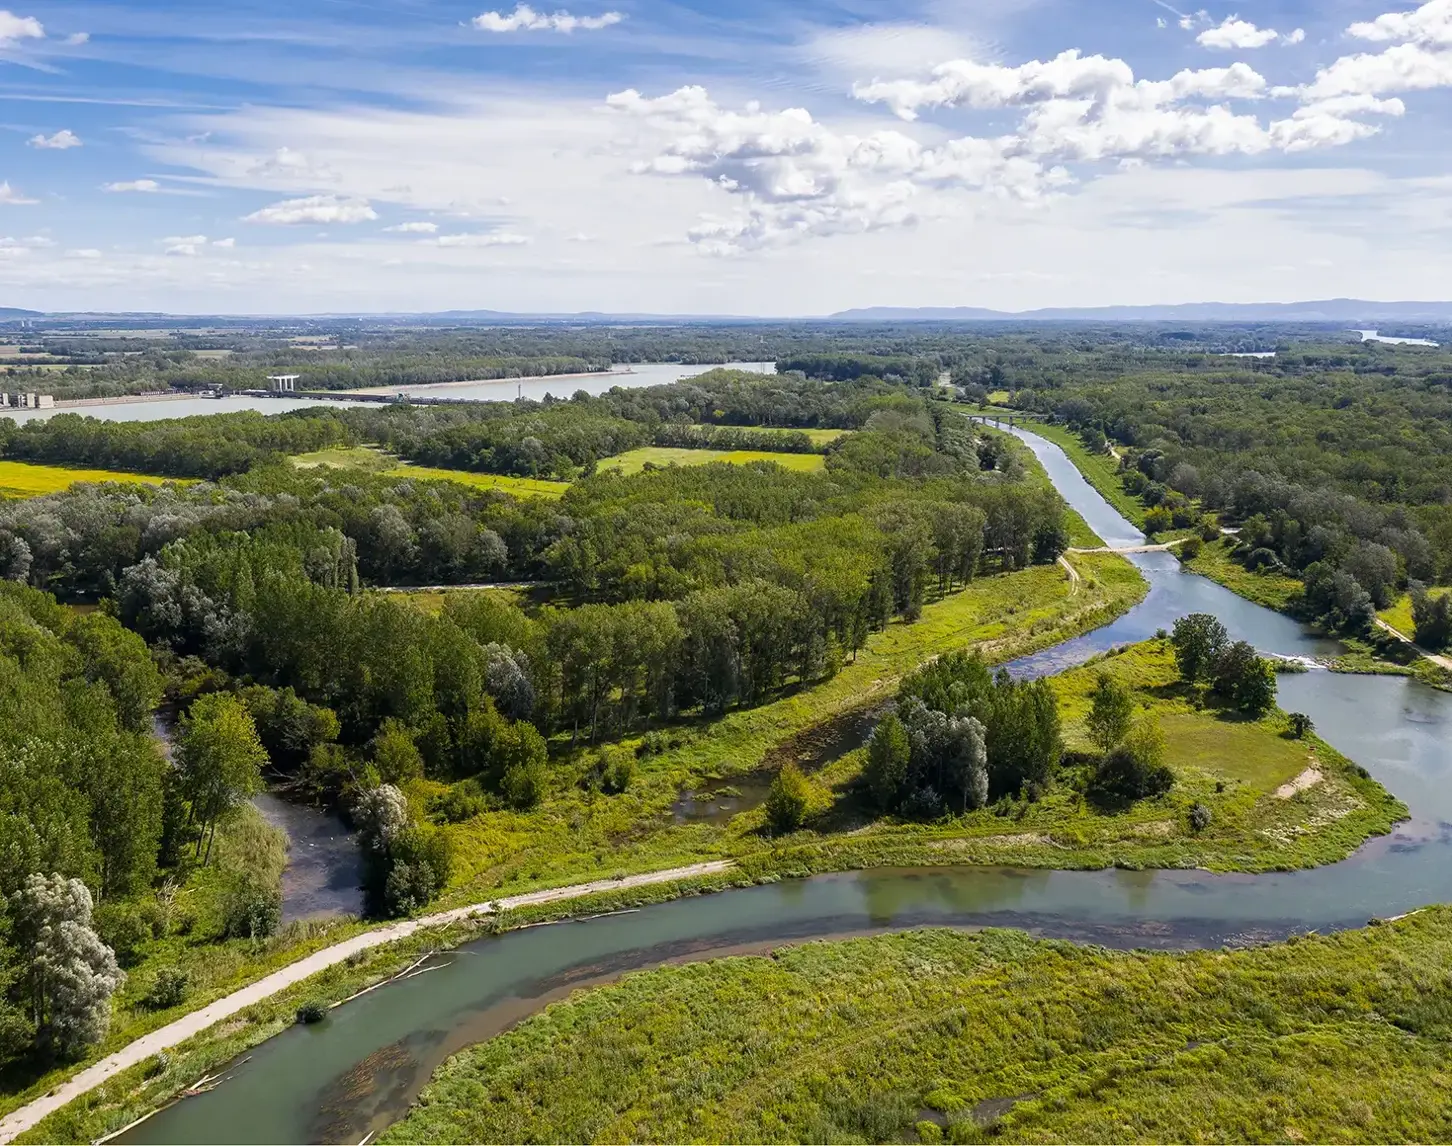 The new 10 km long meandering Traisen river has been completed and will continue to develop dynamically and naturally. The picture shows the full glory from above.